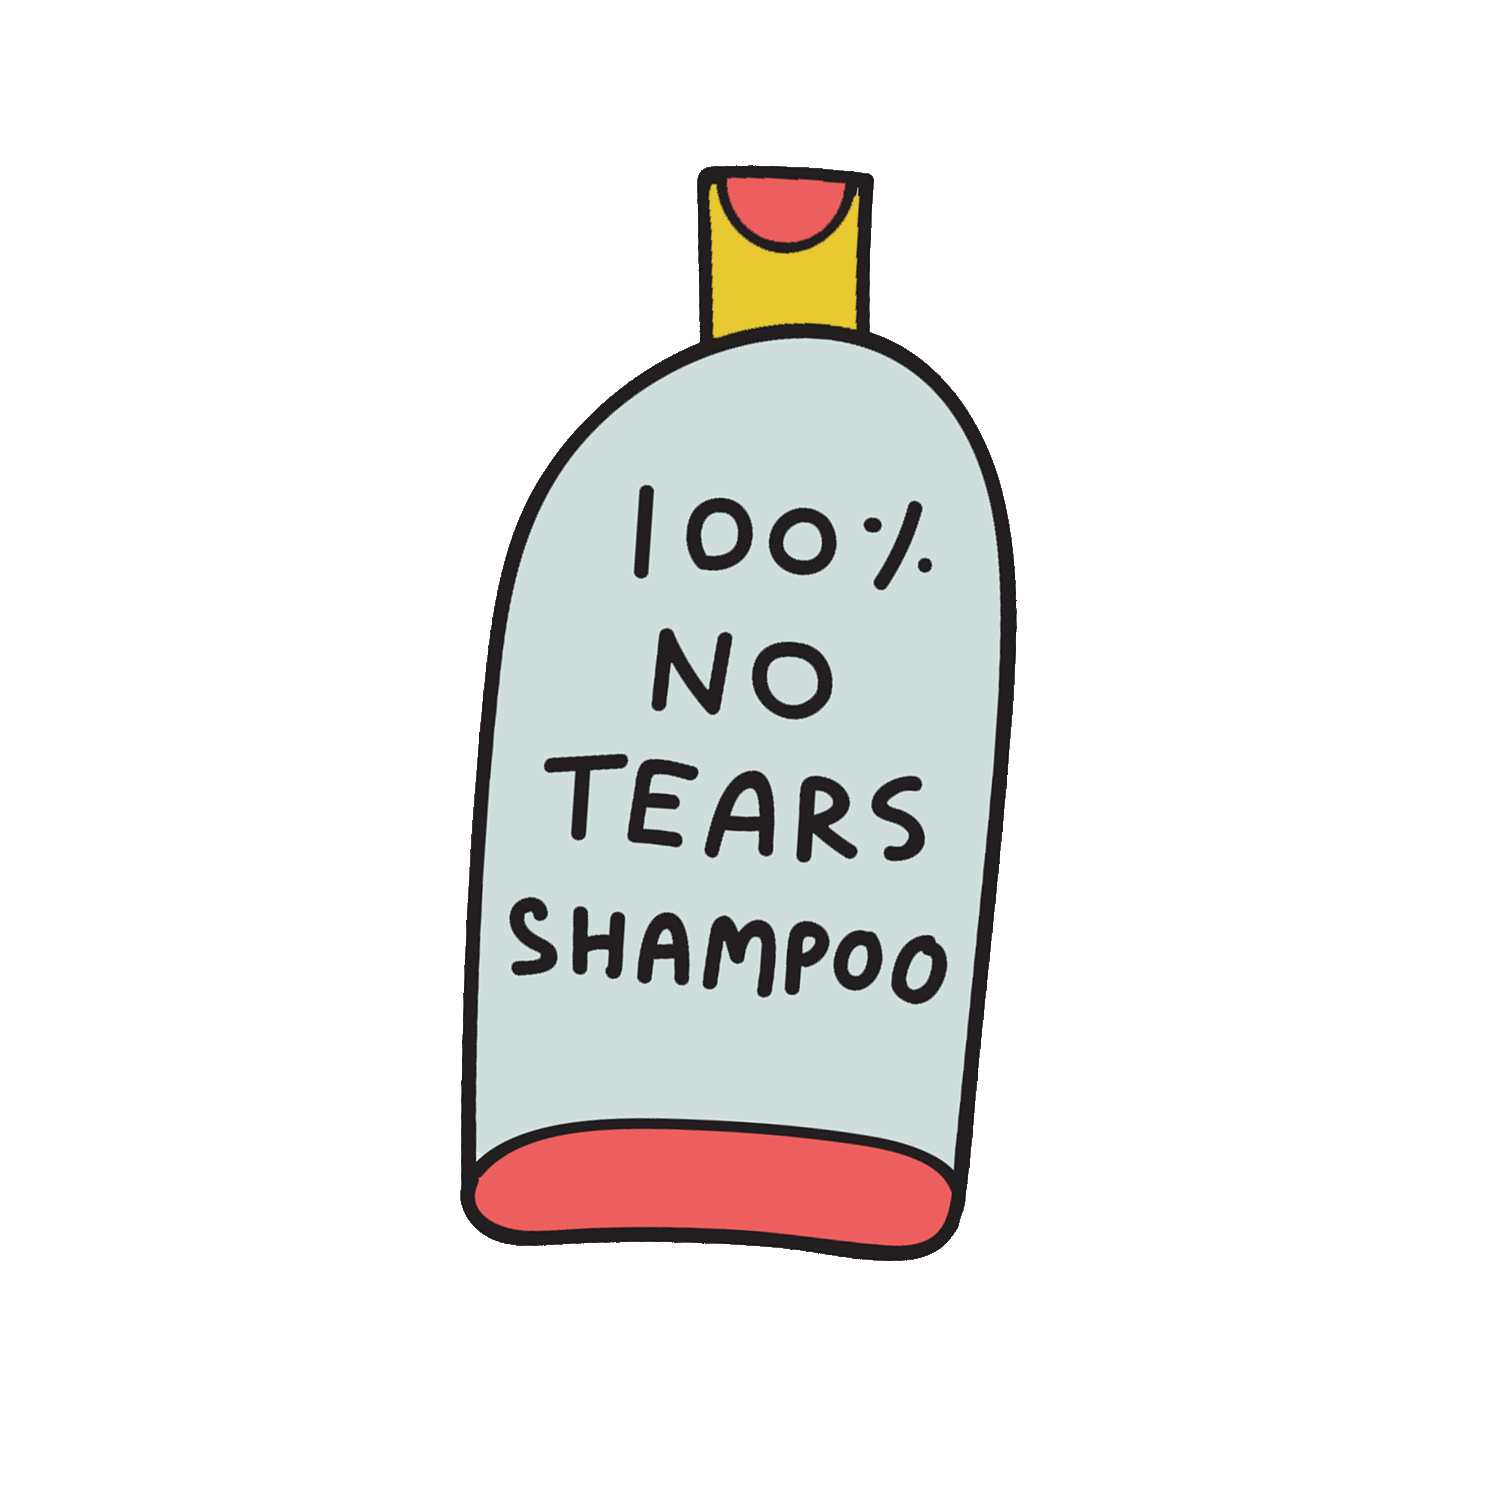 Crying sticker by nicole. Shampoo clipart washing hair